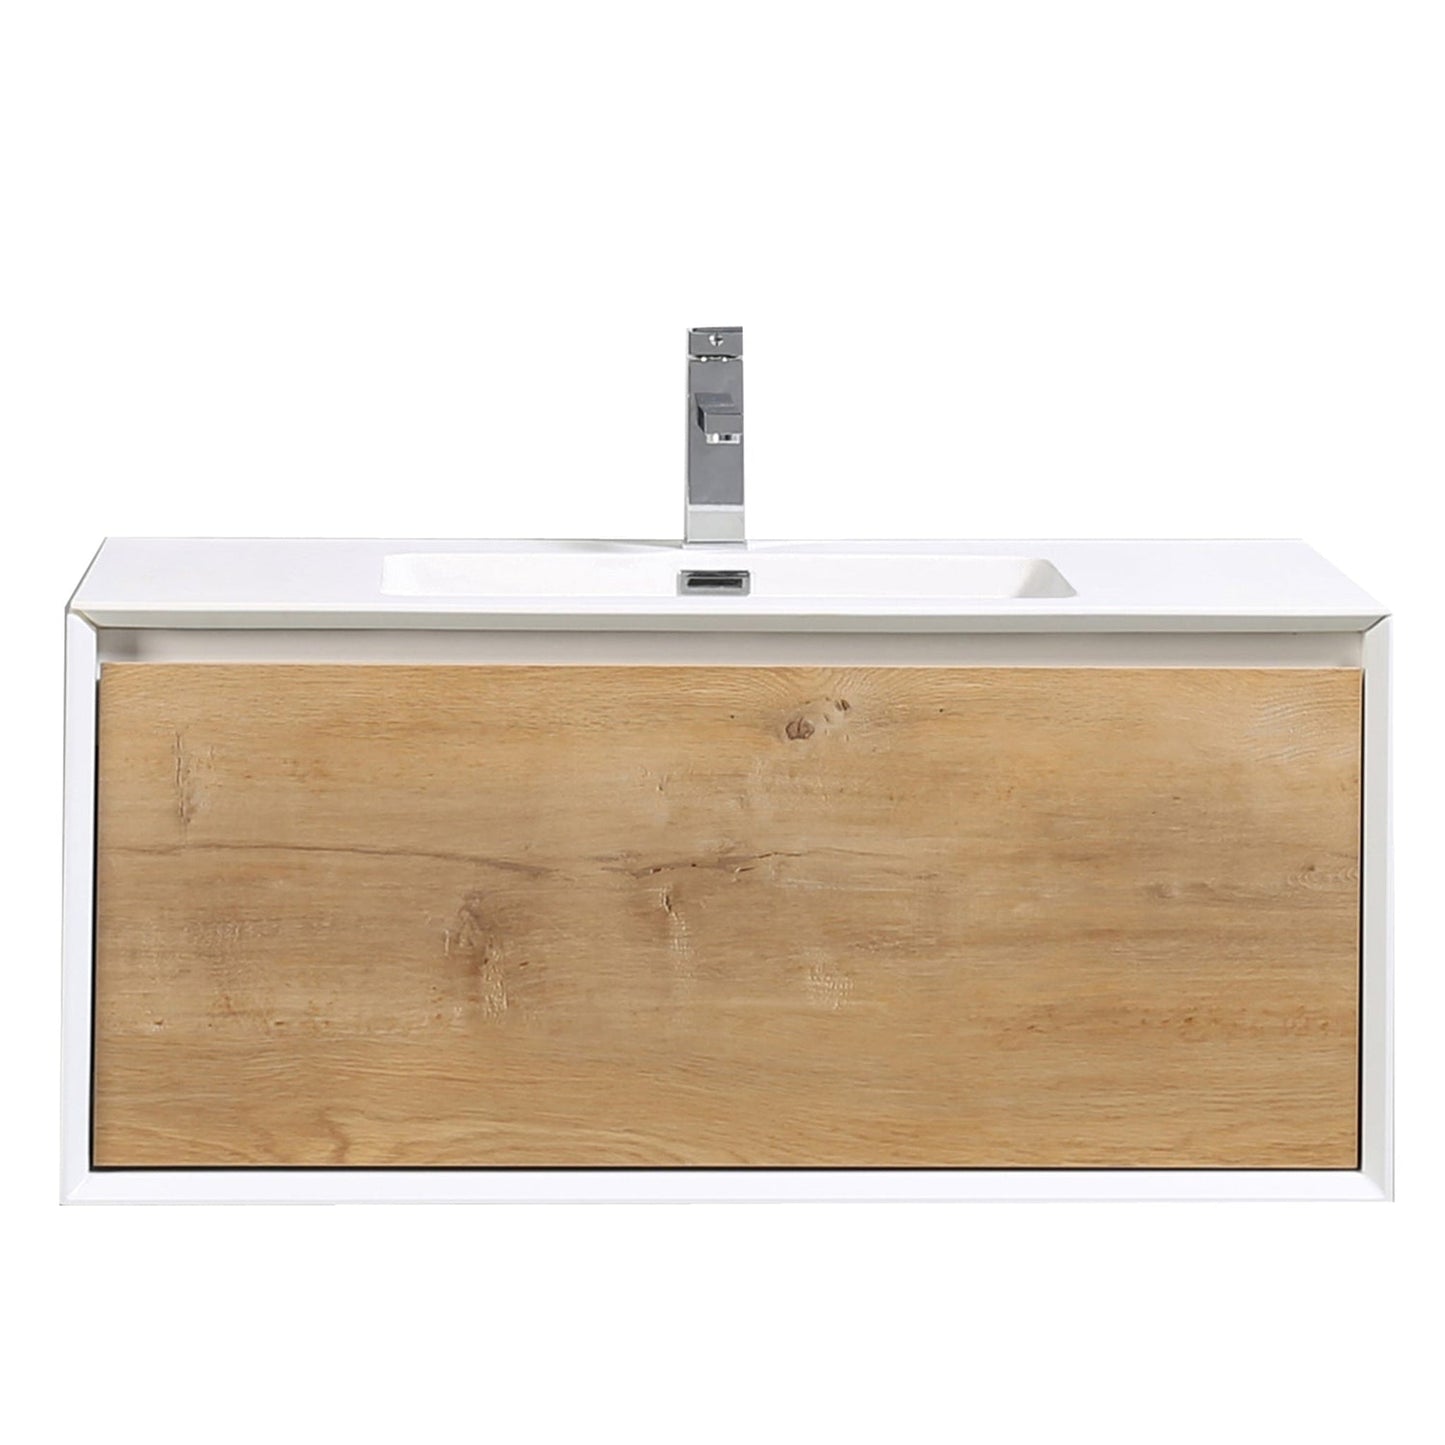 Eviva Vienna 36" x 22" Oak White Wall-Mounted Bathroom Vanity With White Single Integrated Sink